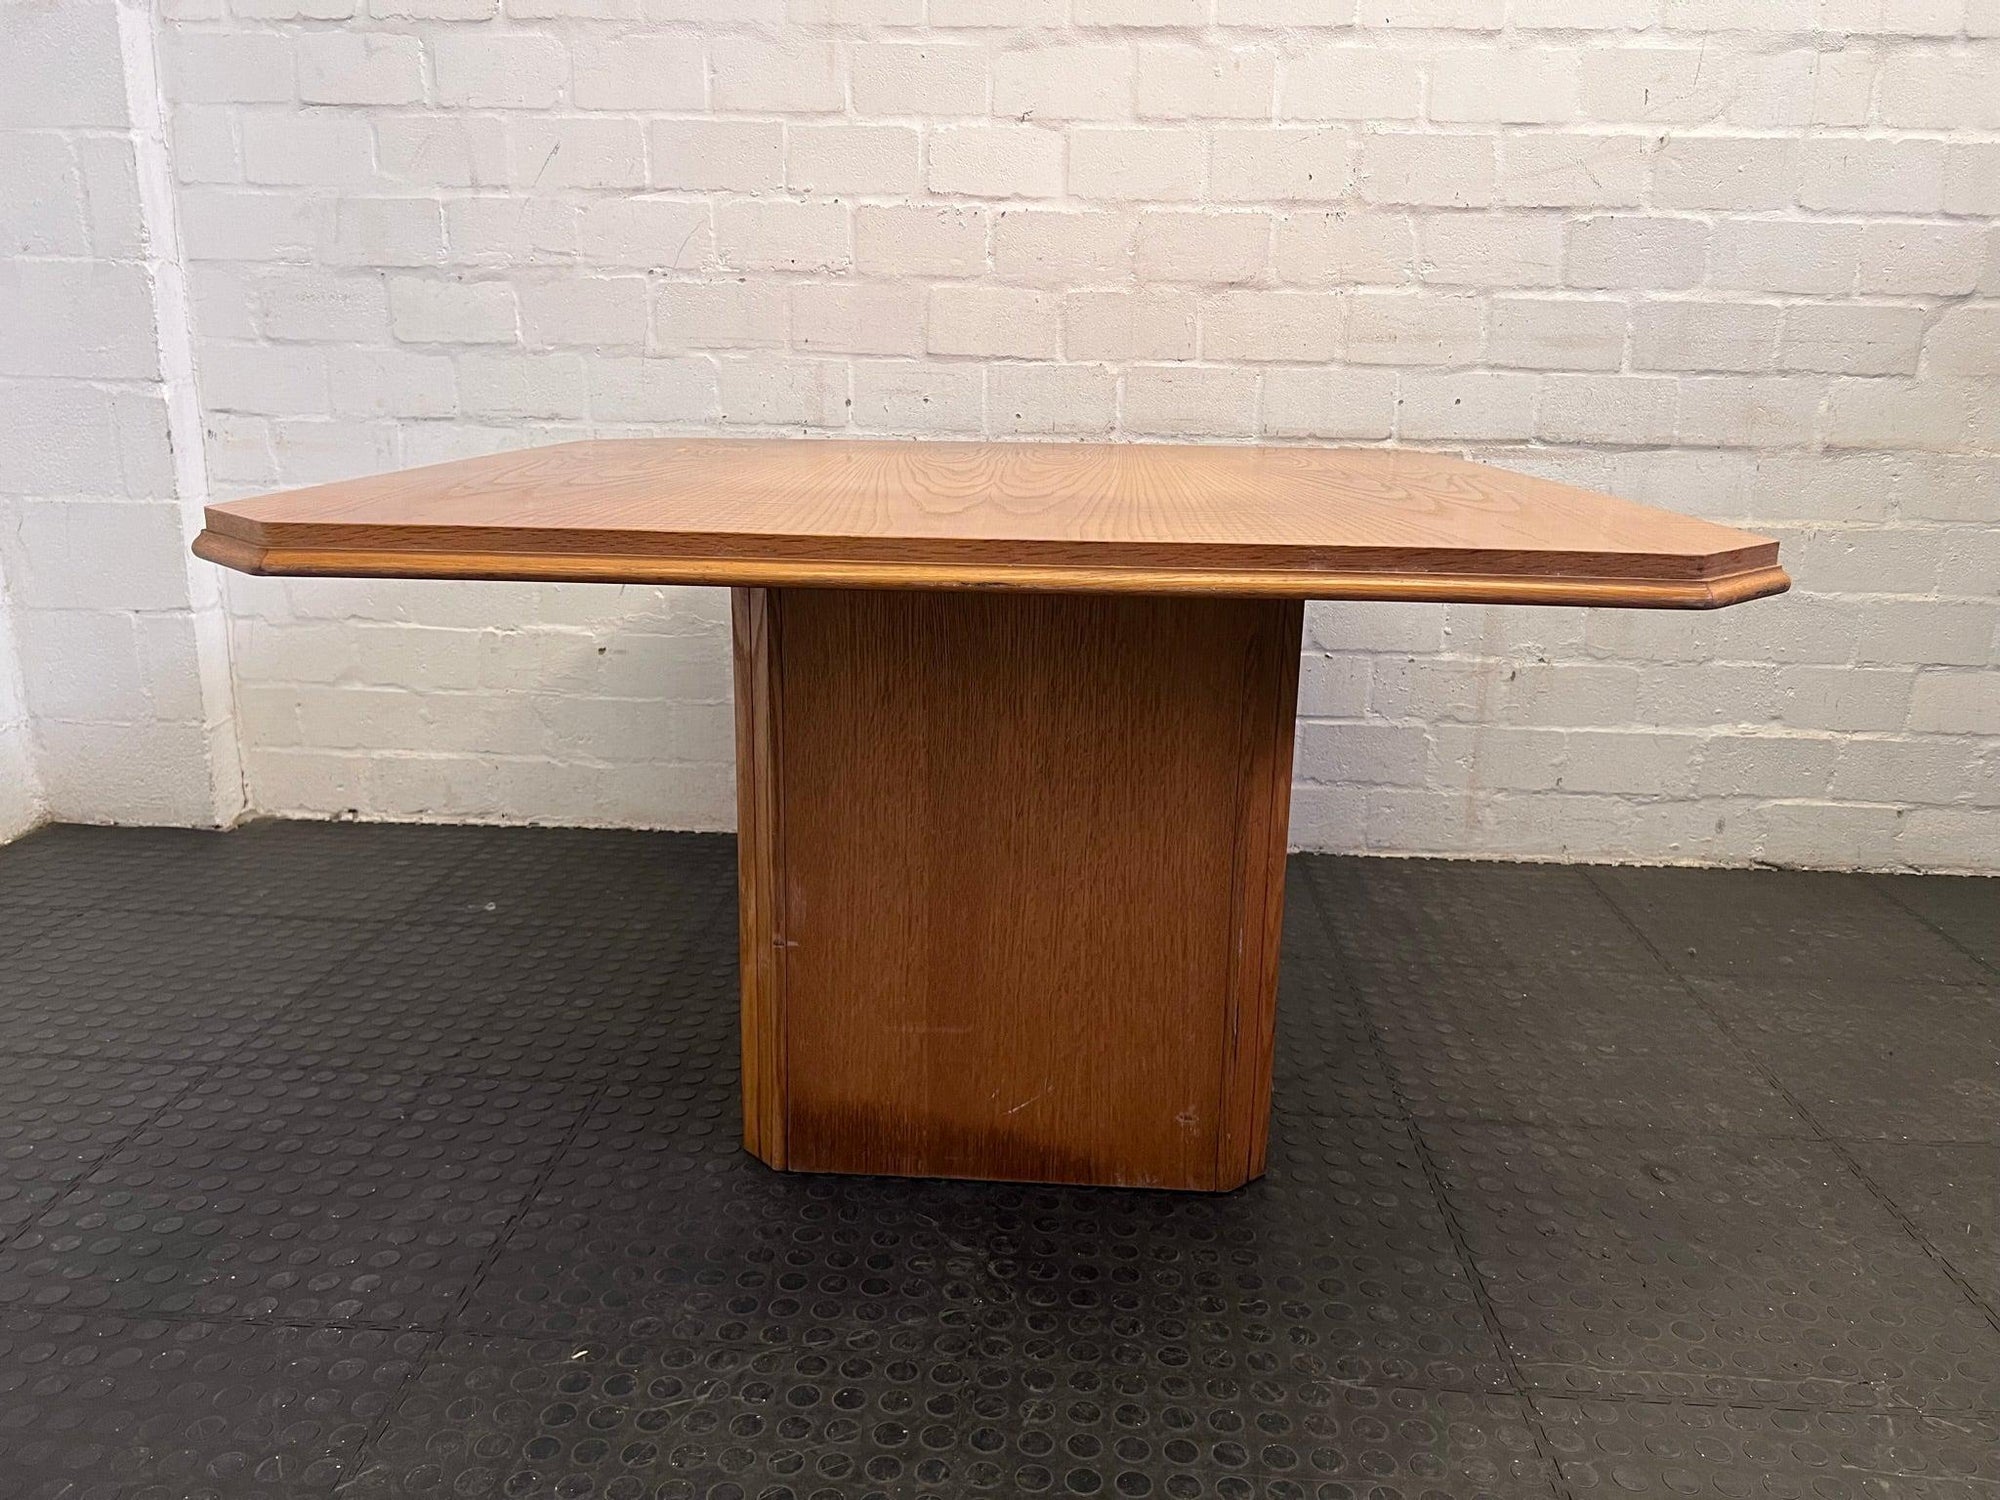 6 Seater Wooden Dining Room Table - REDUCED